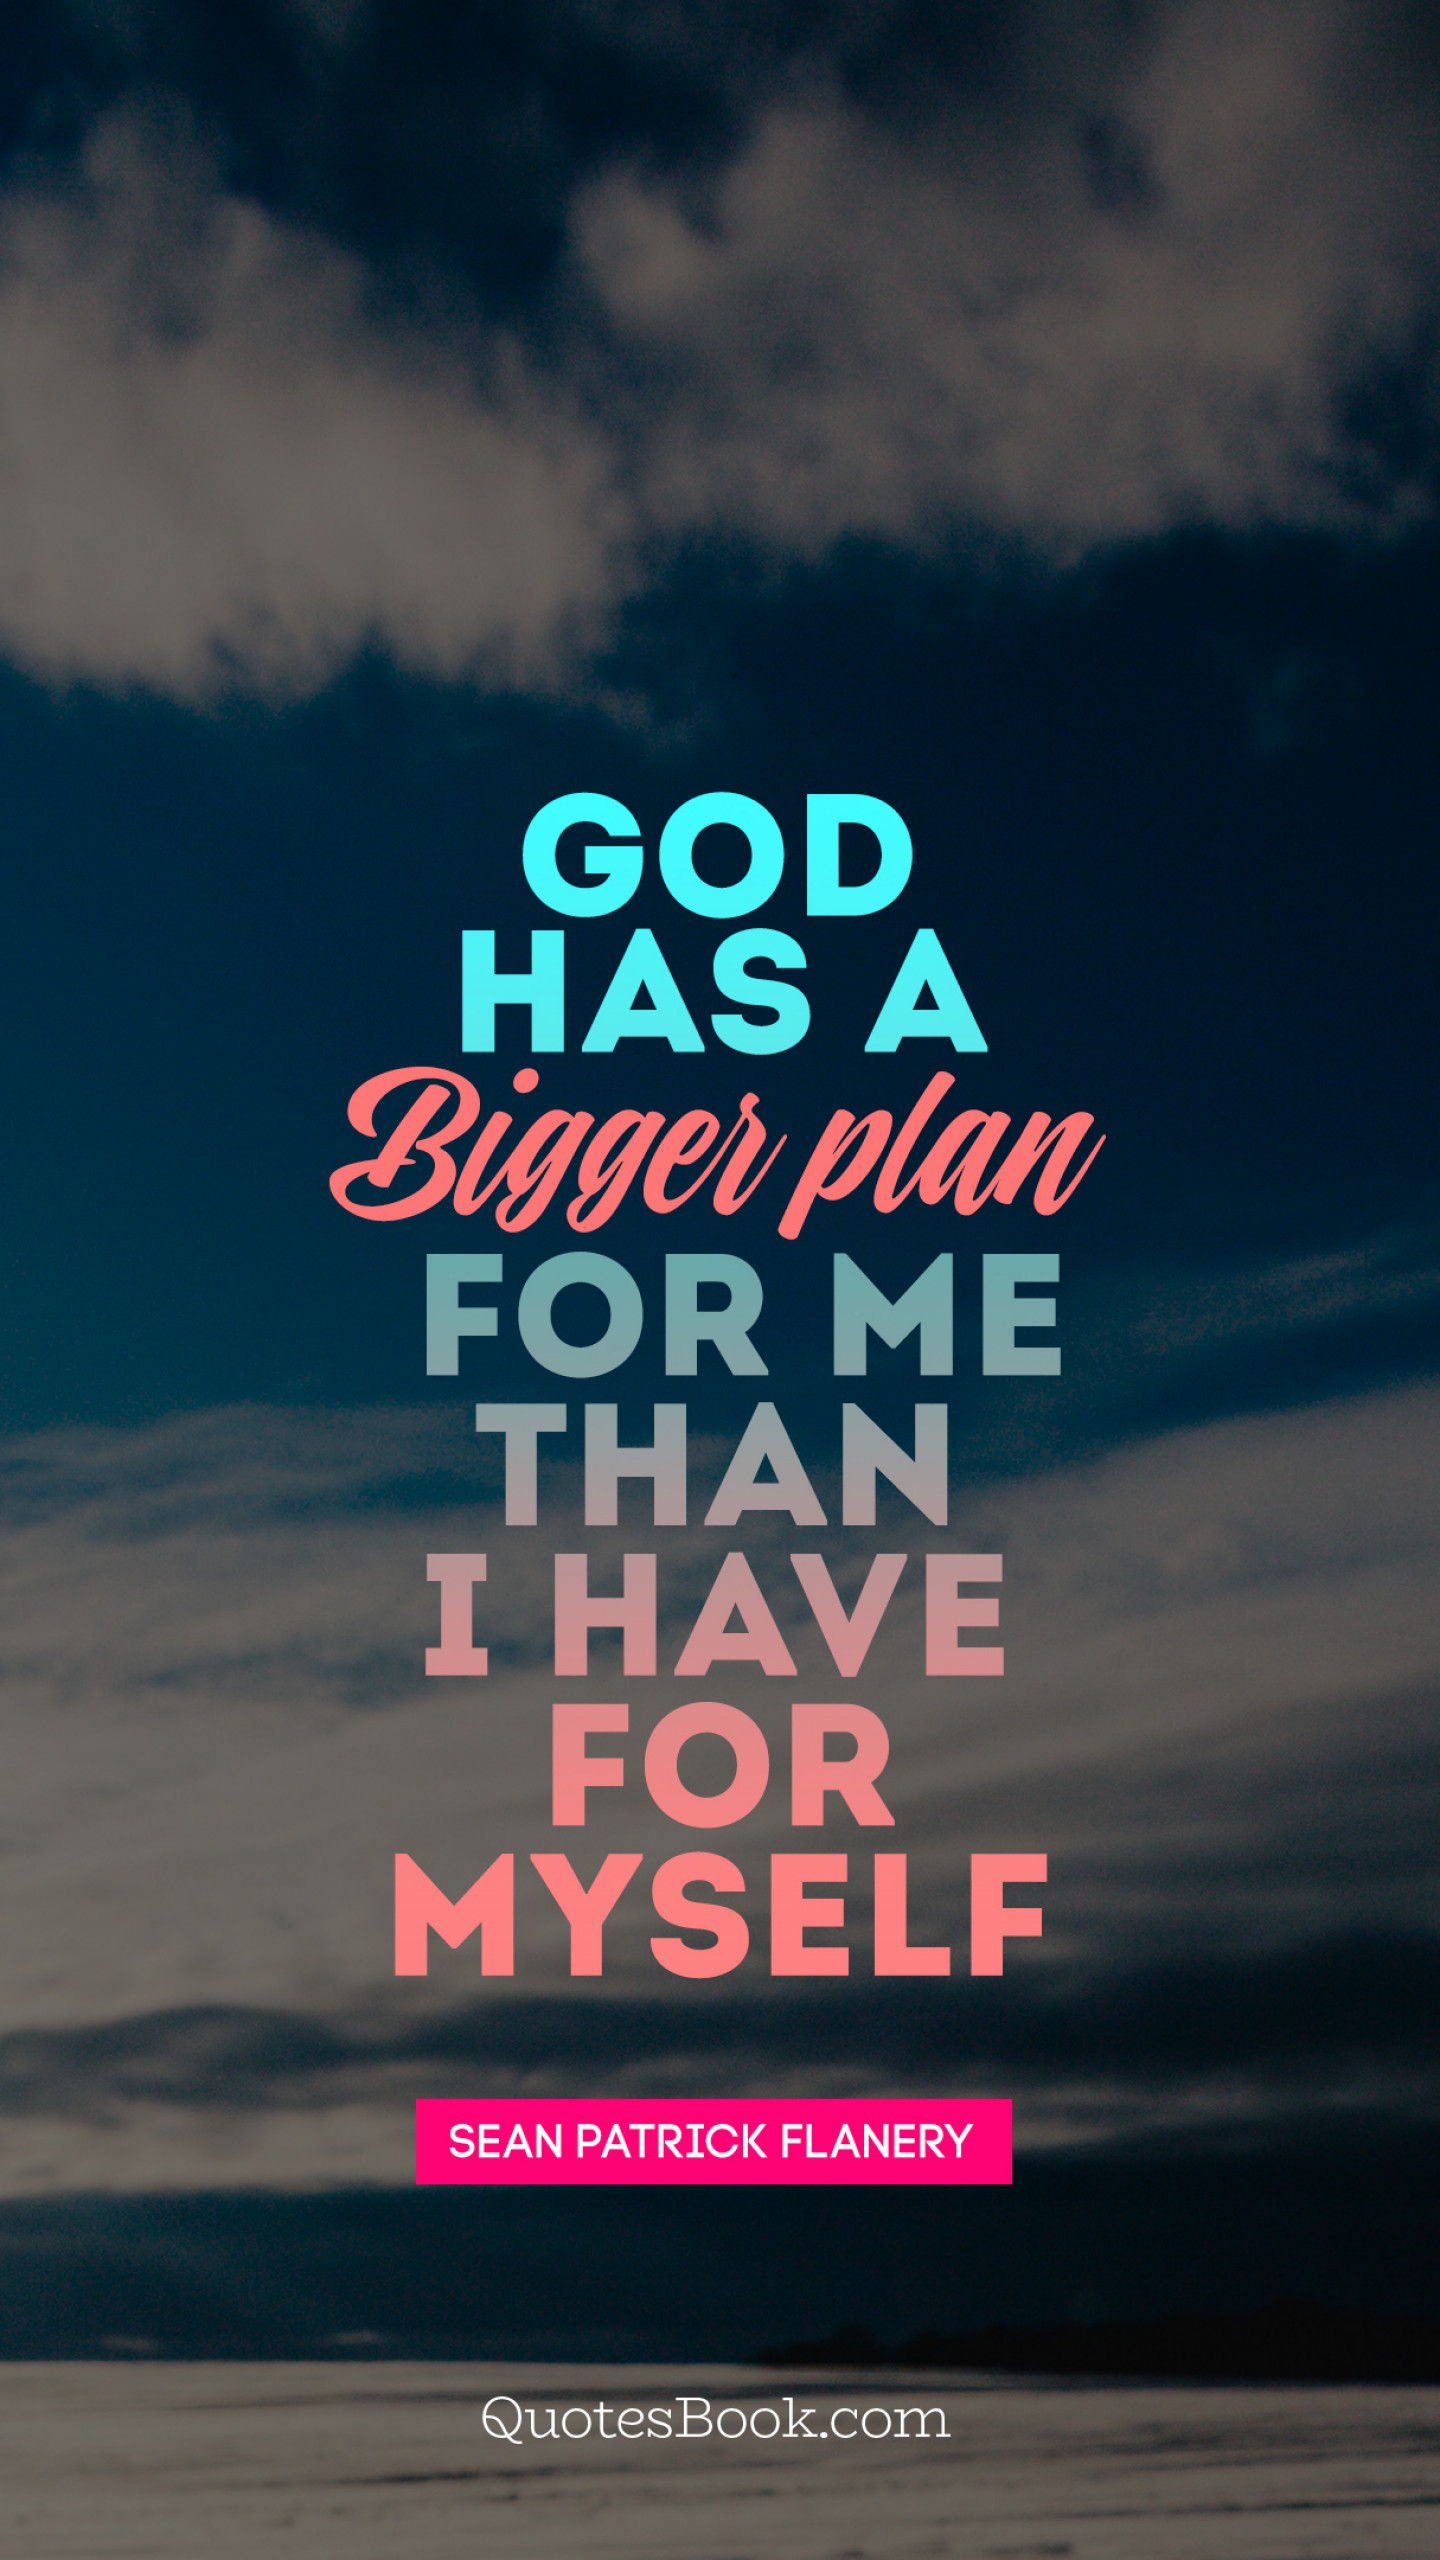 God has a good plan for me than I have for myself - QuotesBook